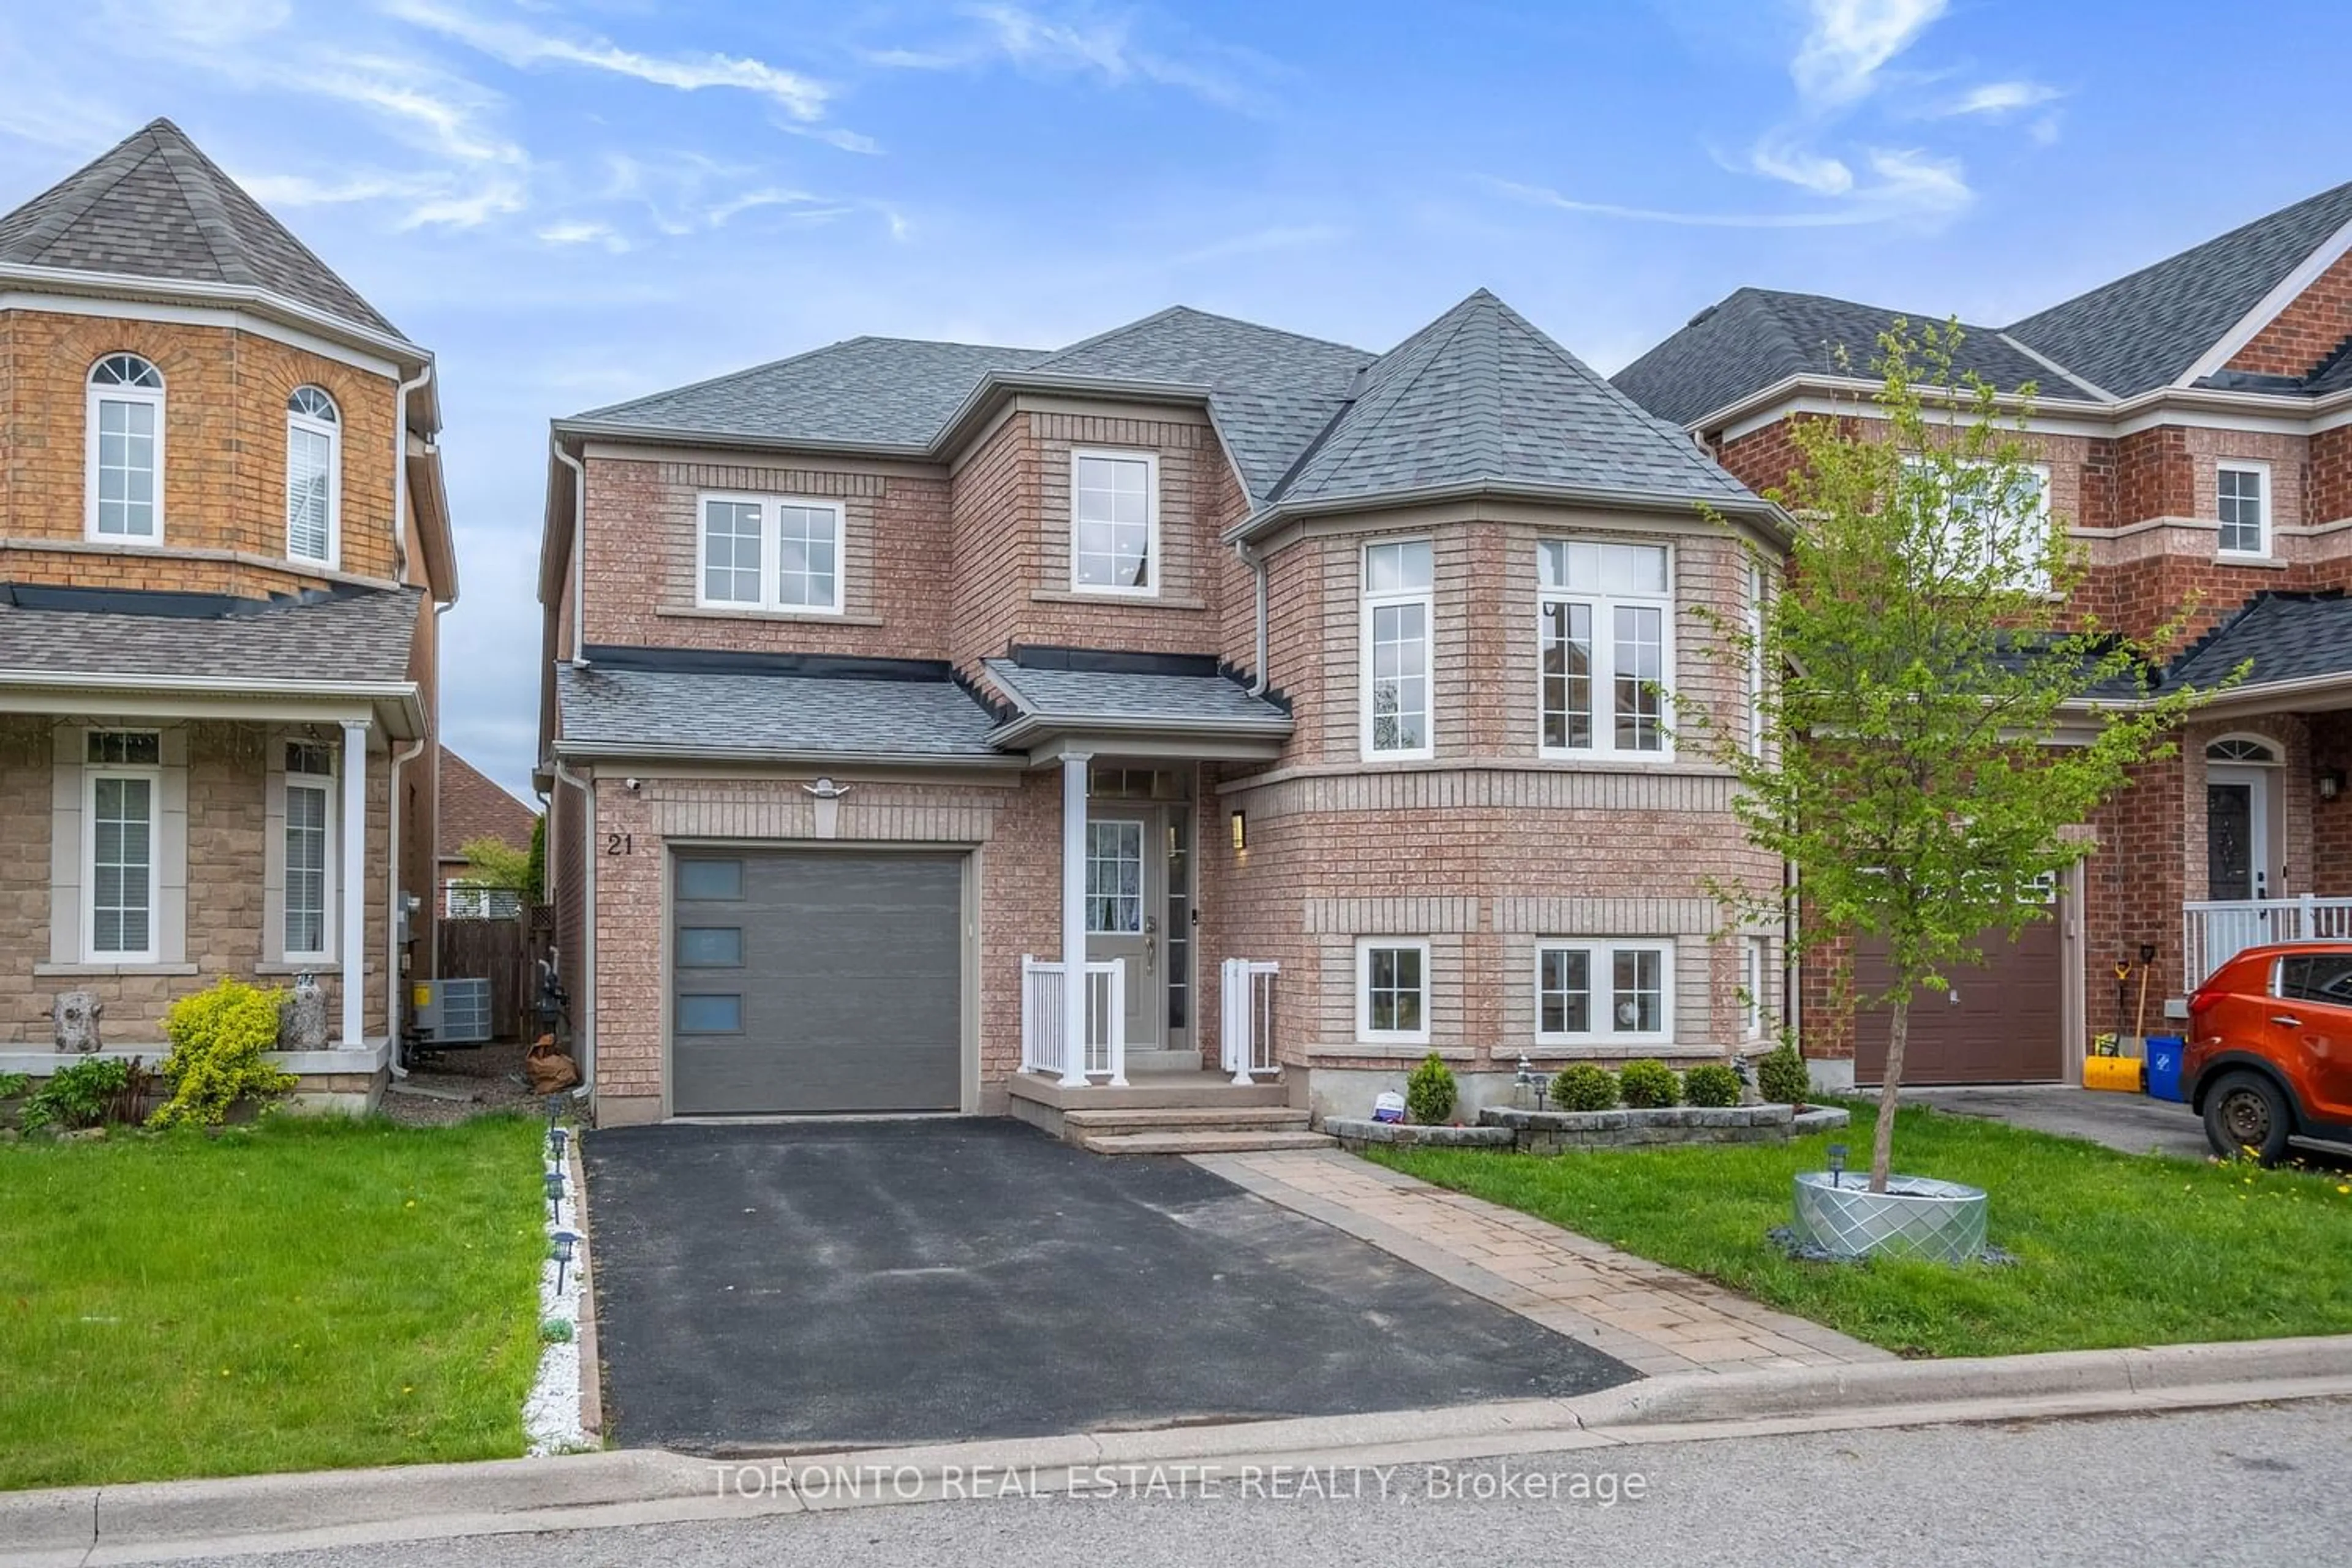 Home with brick exterior material for 21 Greengage St, Markham Ontario L6E 1X8